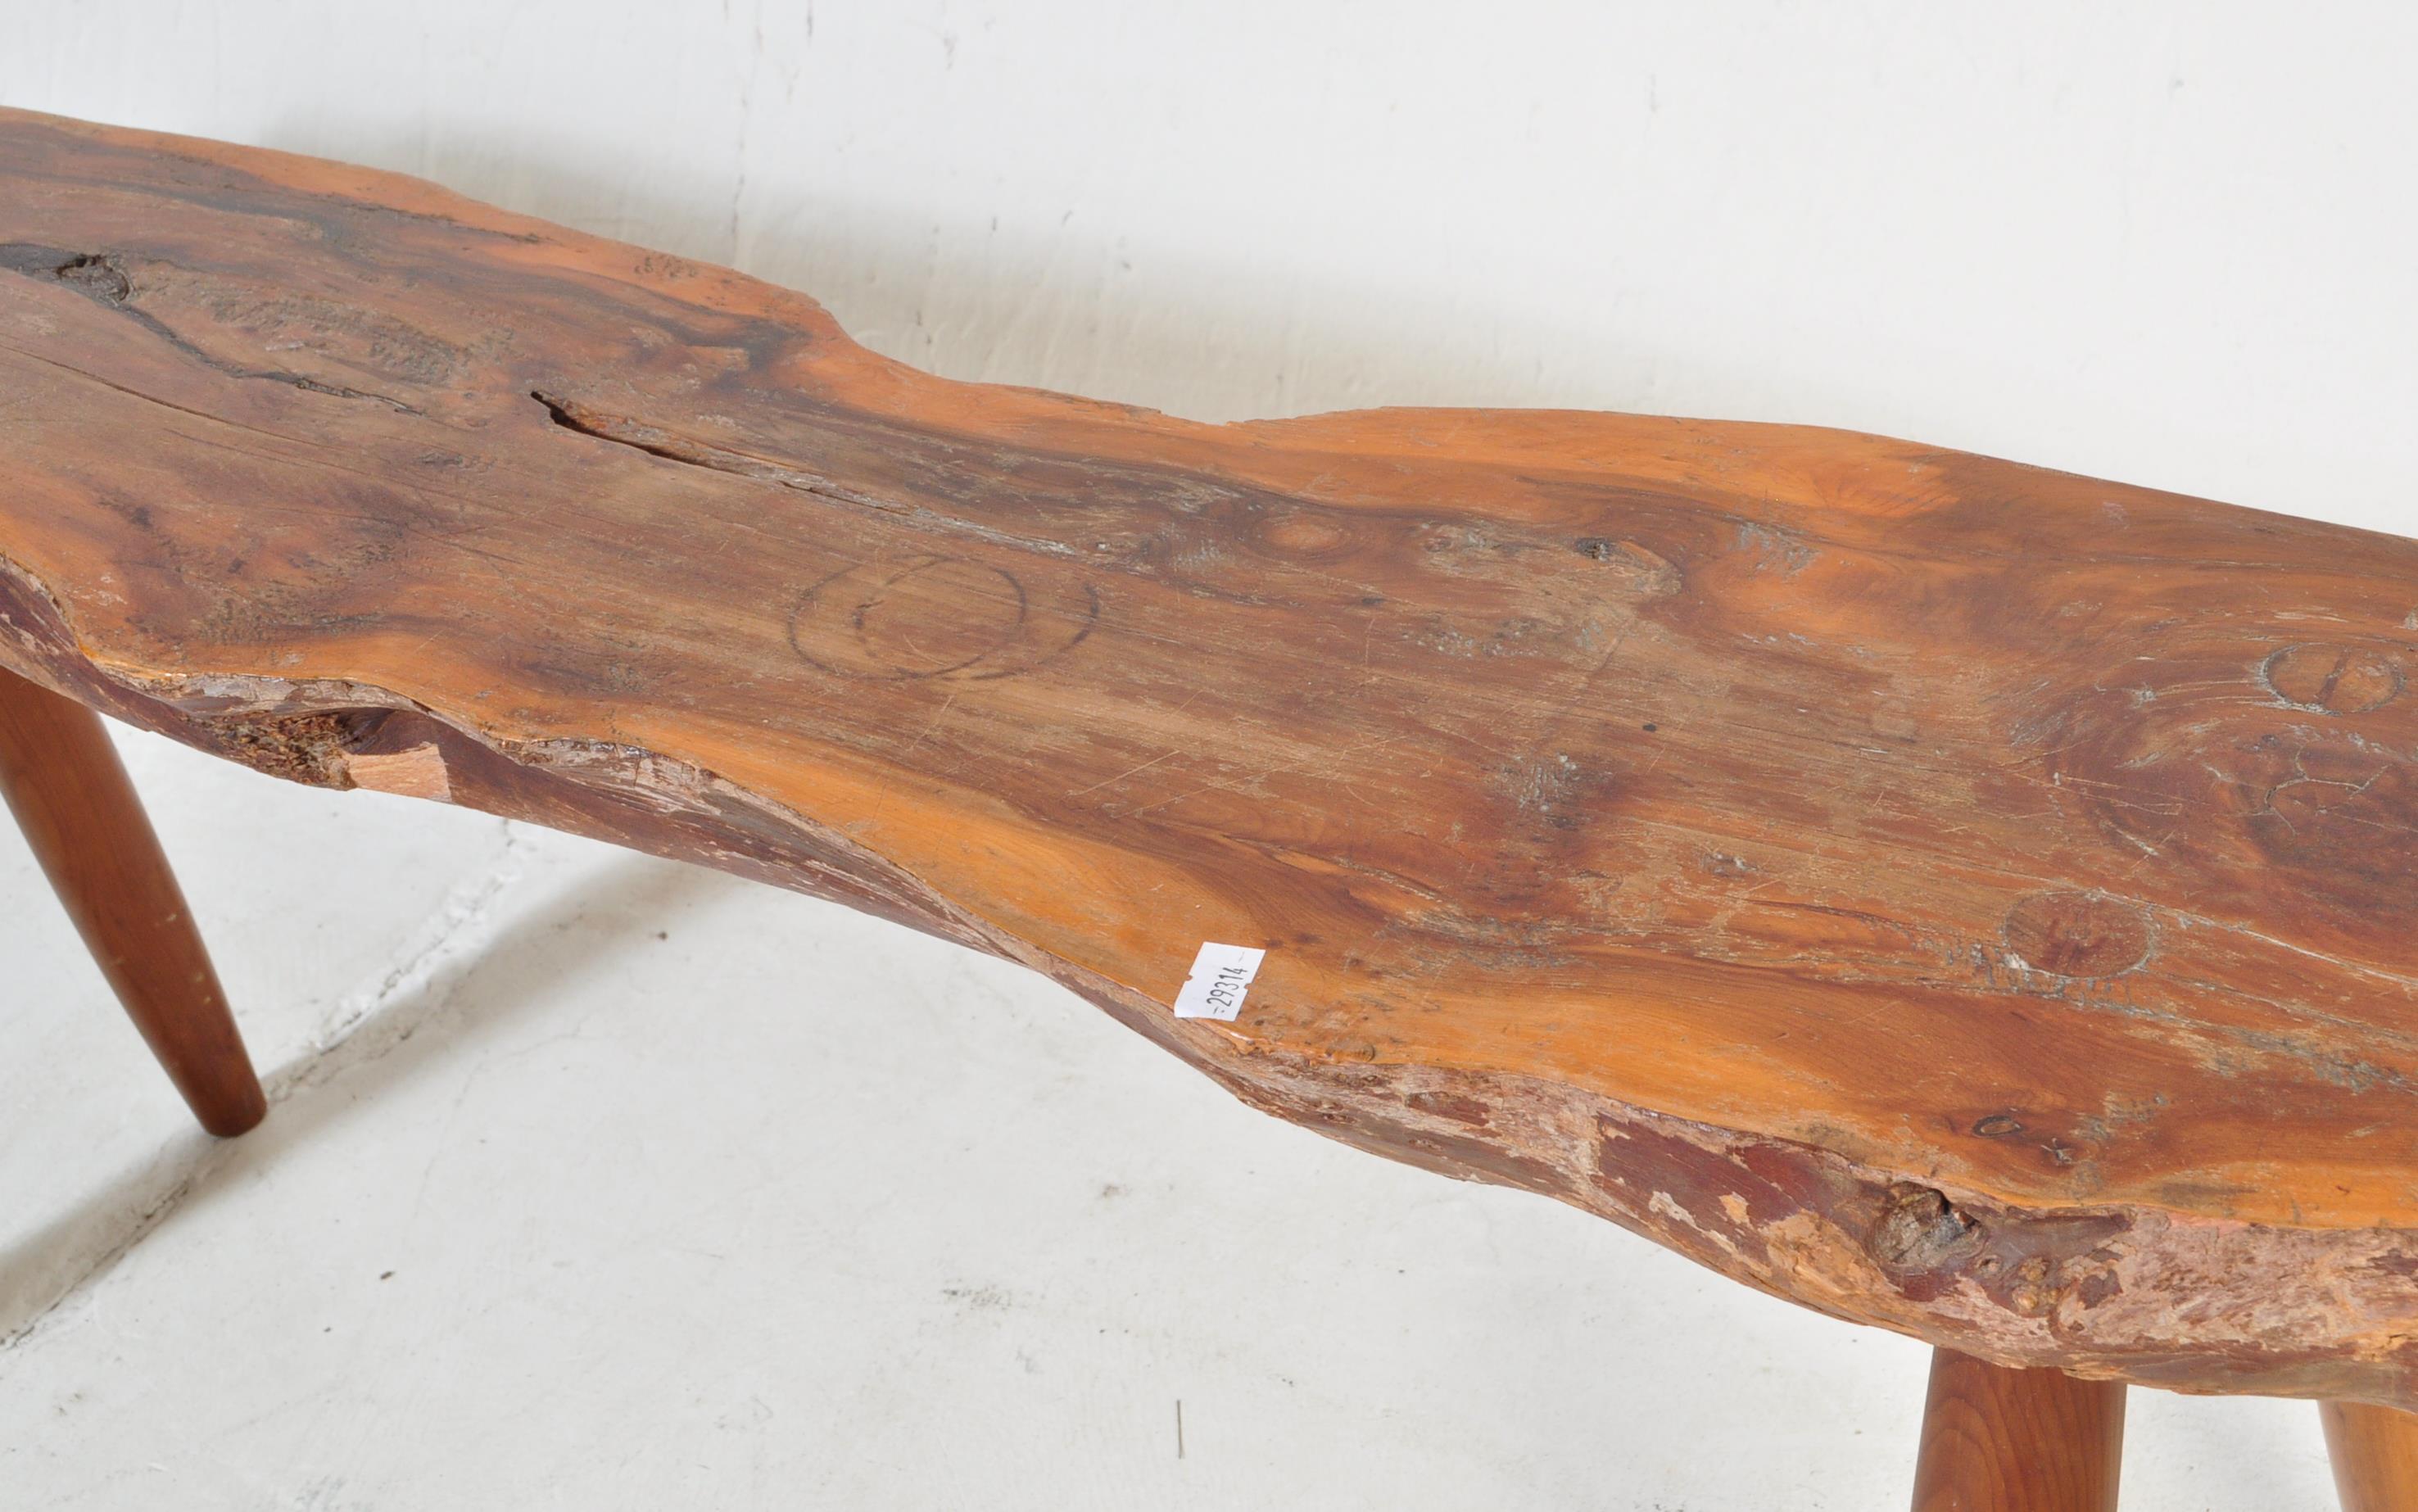 GLOUCESTERSHIRE GUILD OF CRAFTSMEN DRIFTWOOD BENCH - Image 4 of 5